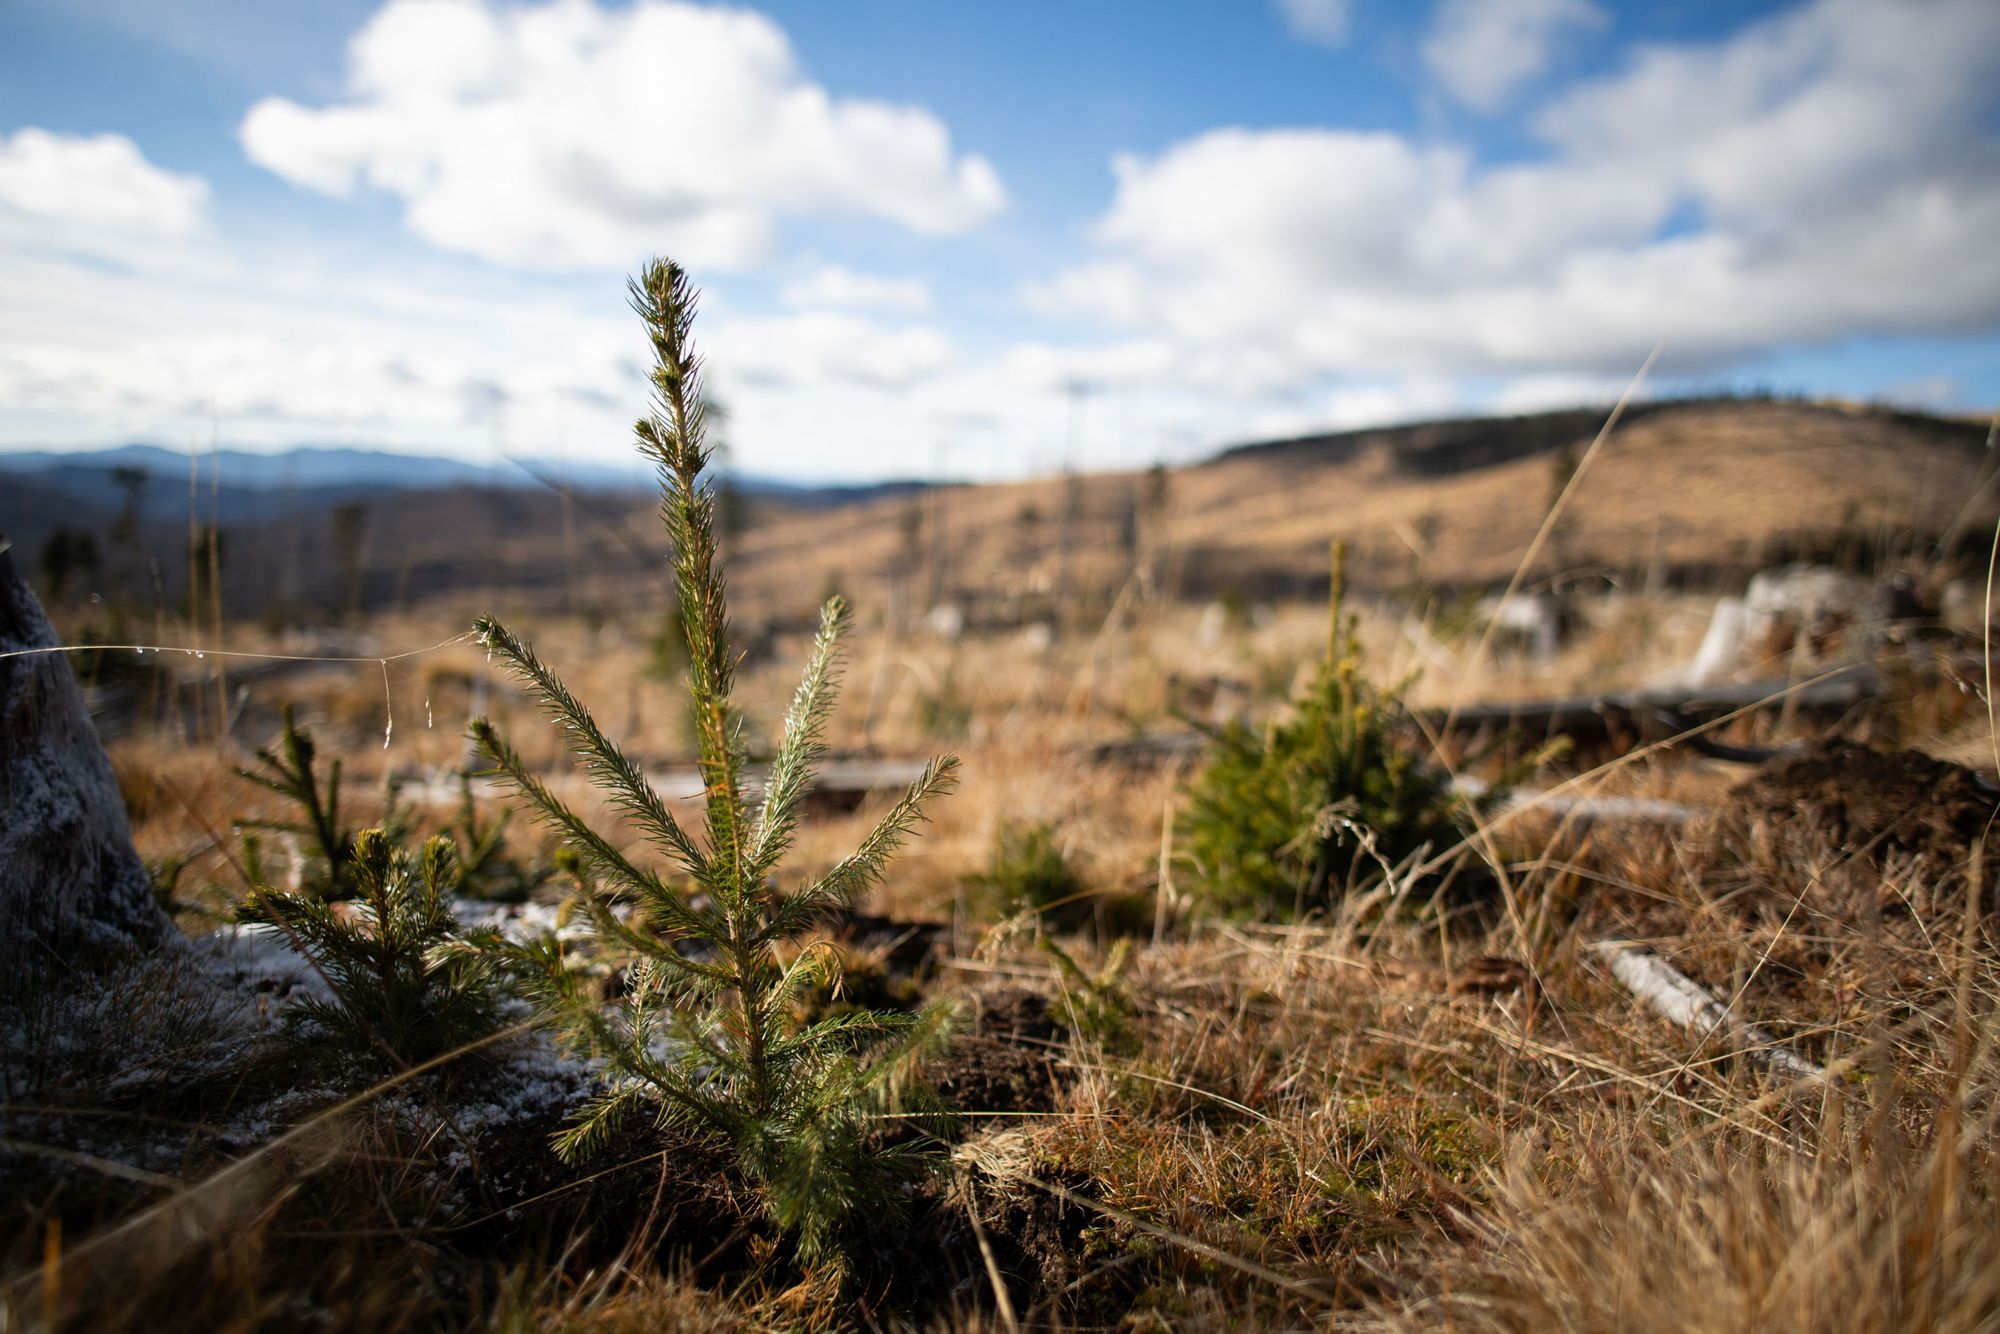 Reforesting the Southern Carpathians, One of Europe's Last Wilderness